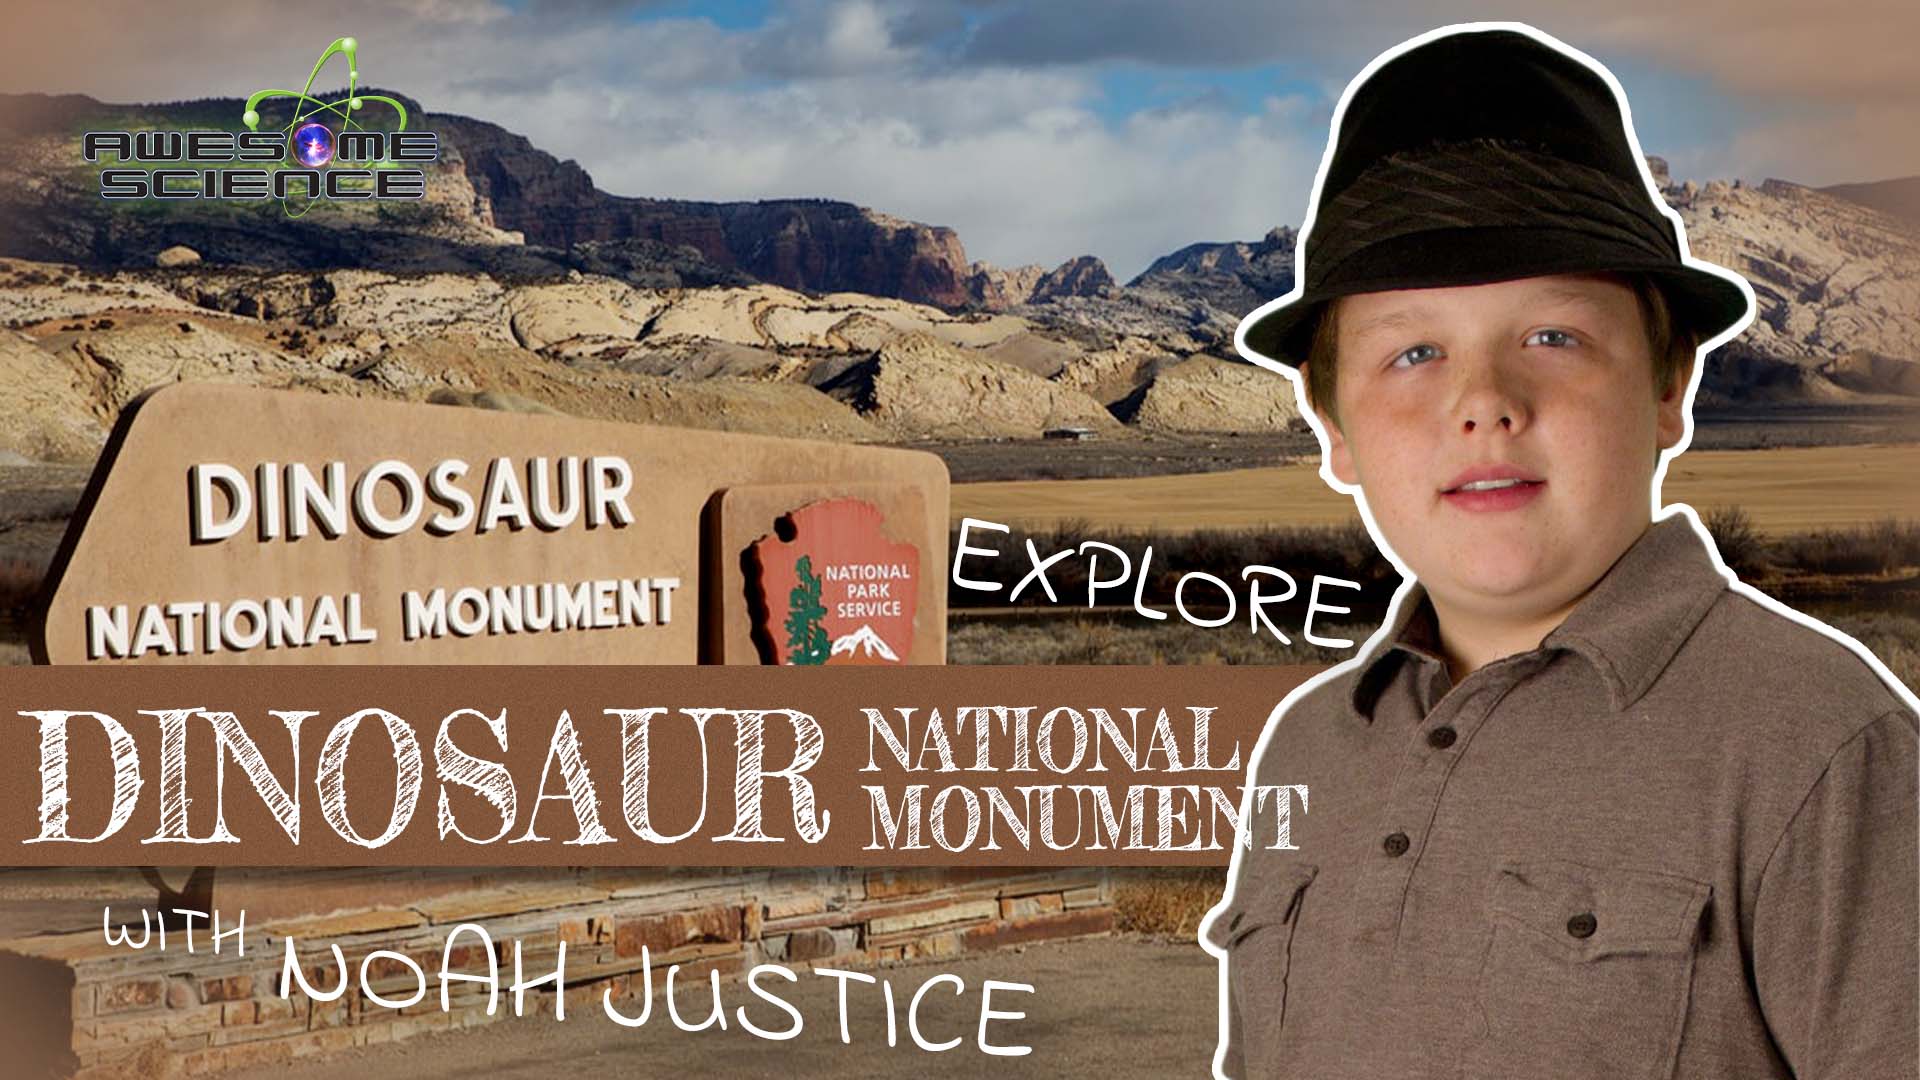 Awesome Science (Episodes 10): Explore Dinosaur National Monument